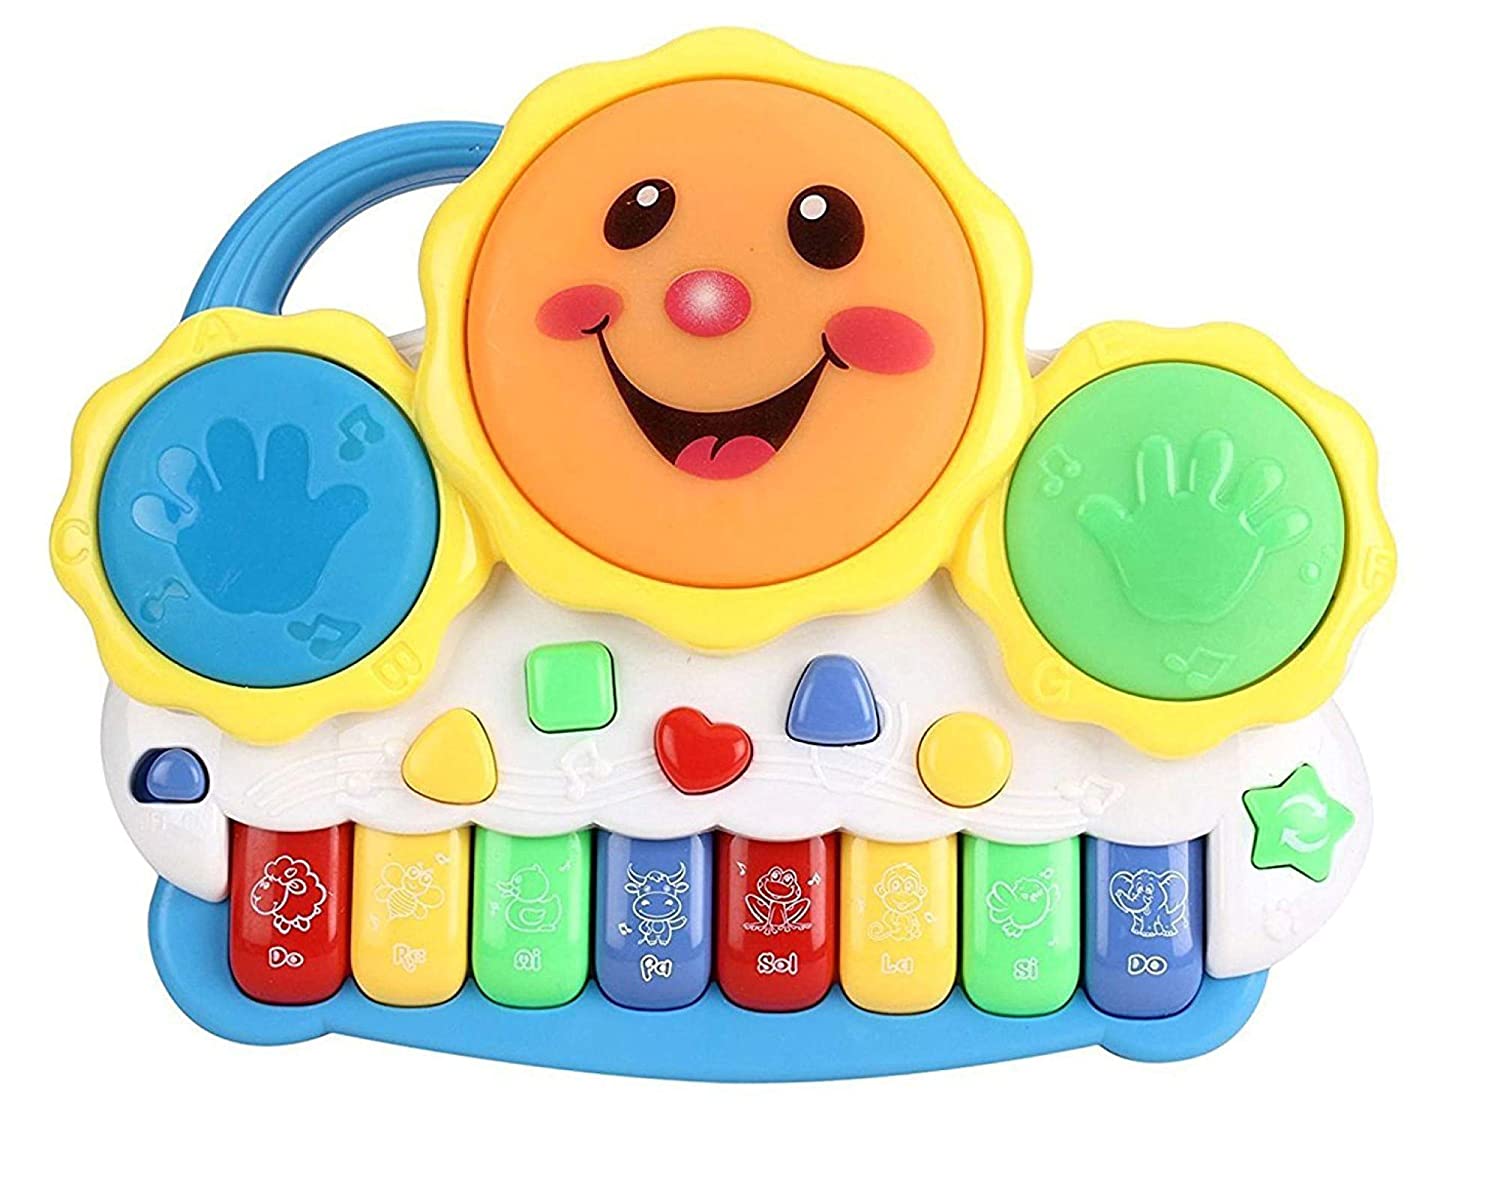 Popsugar Smiley Piano and Keyboard Musical Set with Lights for Kids classiblogger